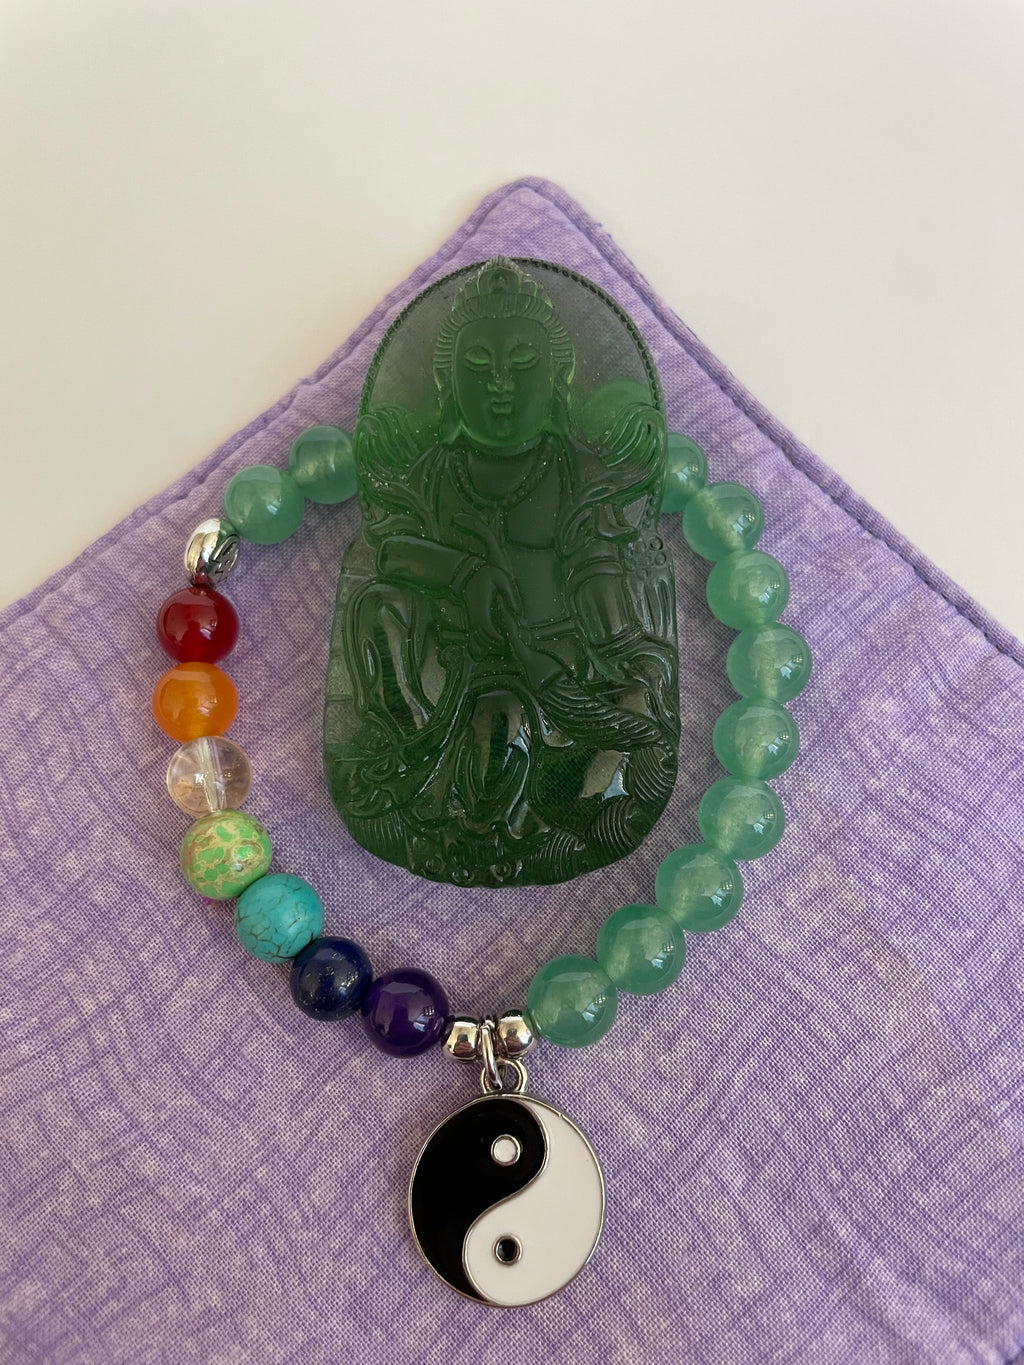 Deep green glass Buddha can be used as pendant (small hole at top) or as a décor item for your altar or bookshelf. The beautiful detailing makes this a special piece. Buddha is revered around the world and his teachings and actions have shown us the beauty, wonder and power of enlightenment. The term Buddha refers to the Awakened One. . He is approximately 2½" tall. Cost is $10.